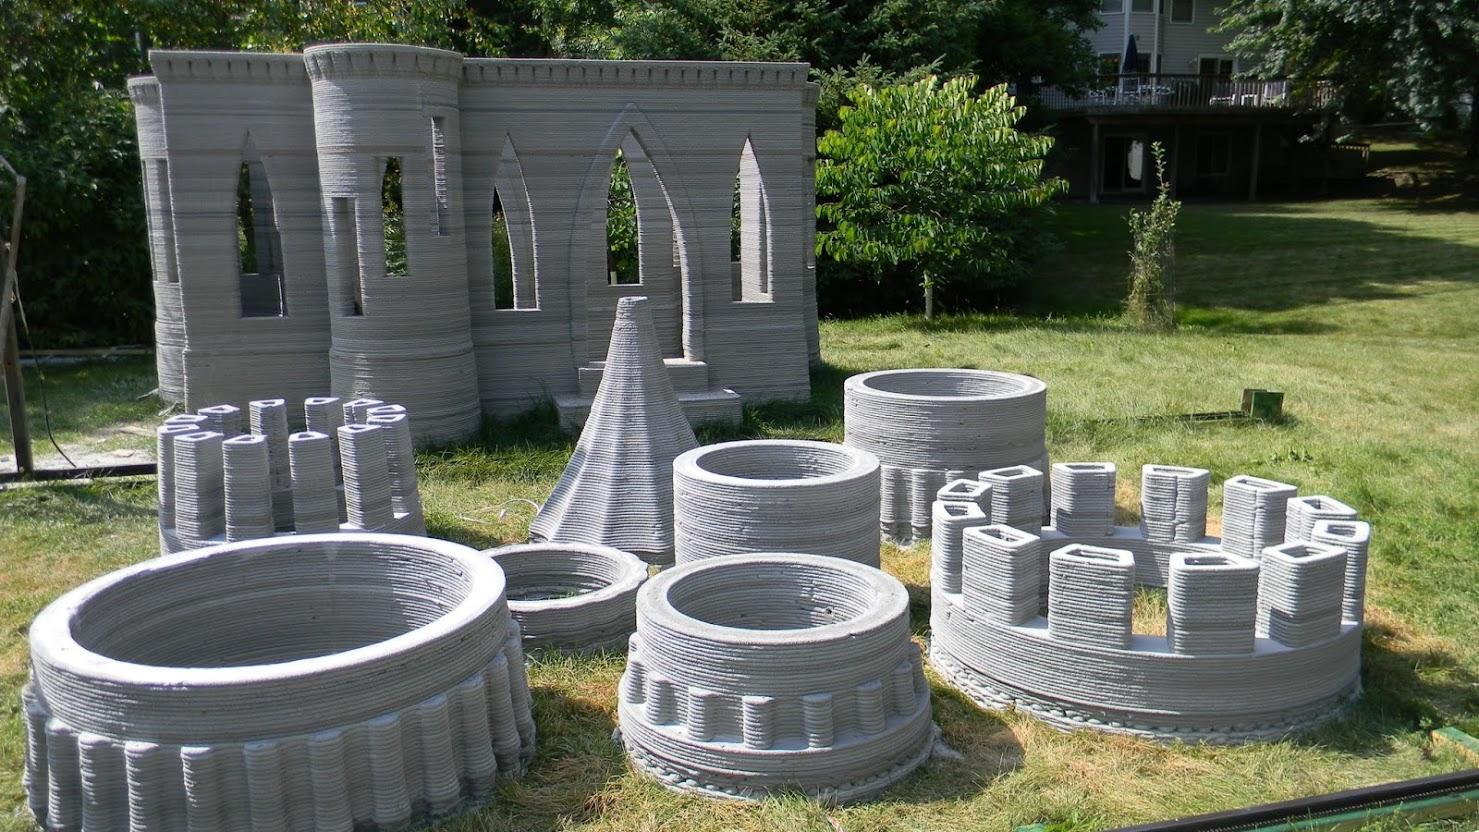 World’s First 3D Printed Castle is Complete Andrey Rudenko Now to